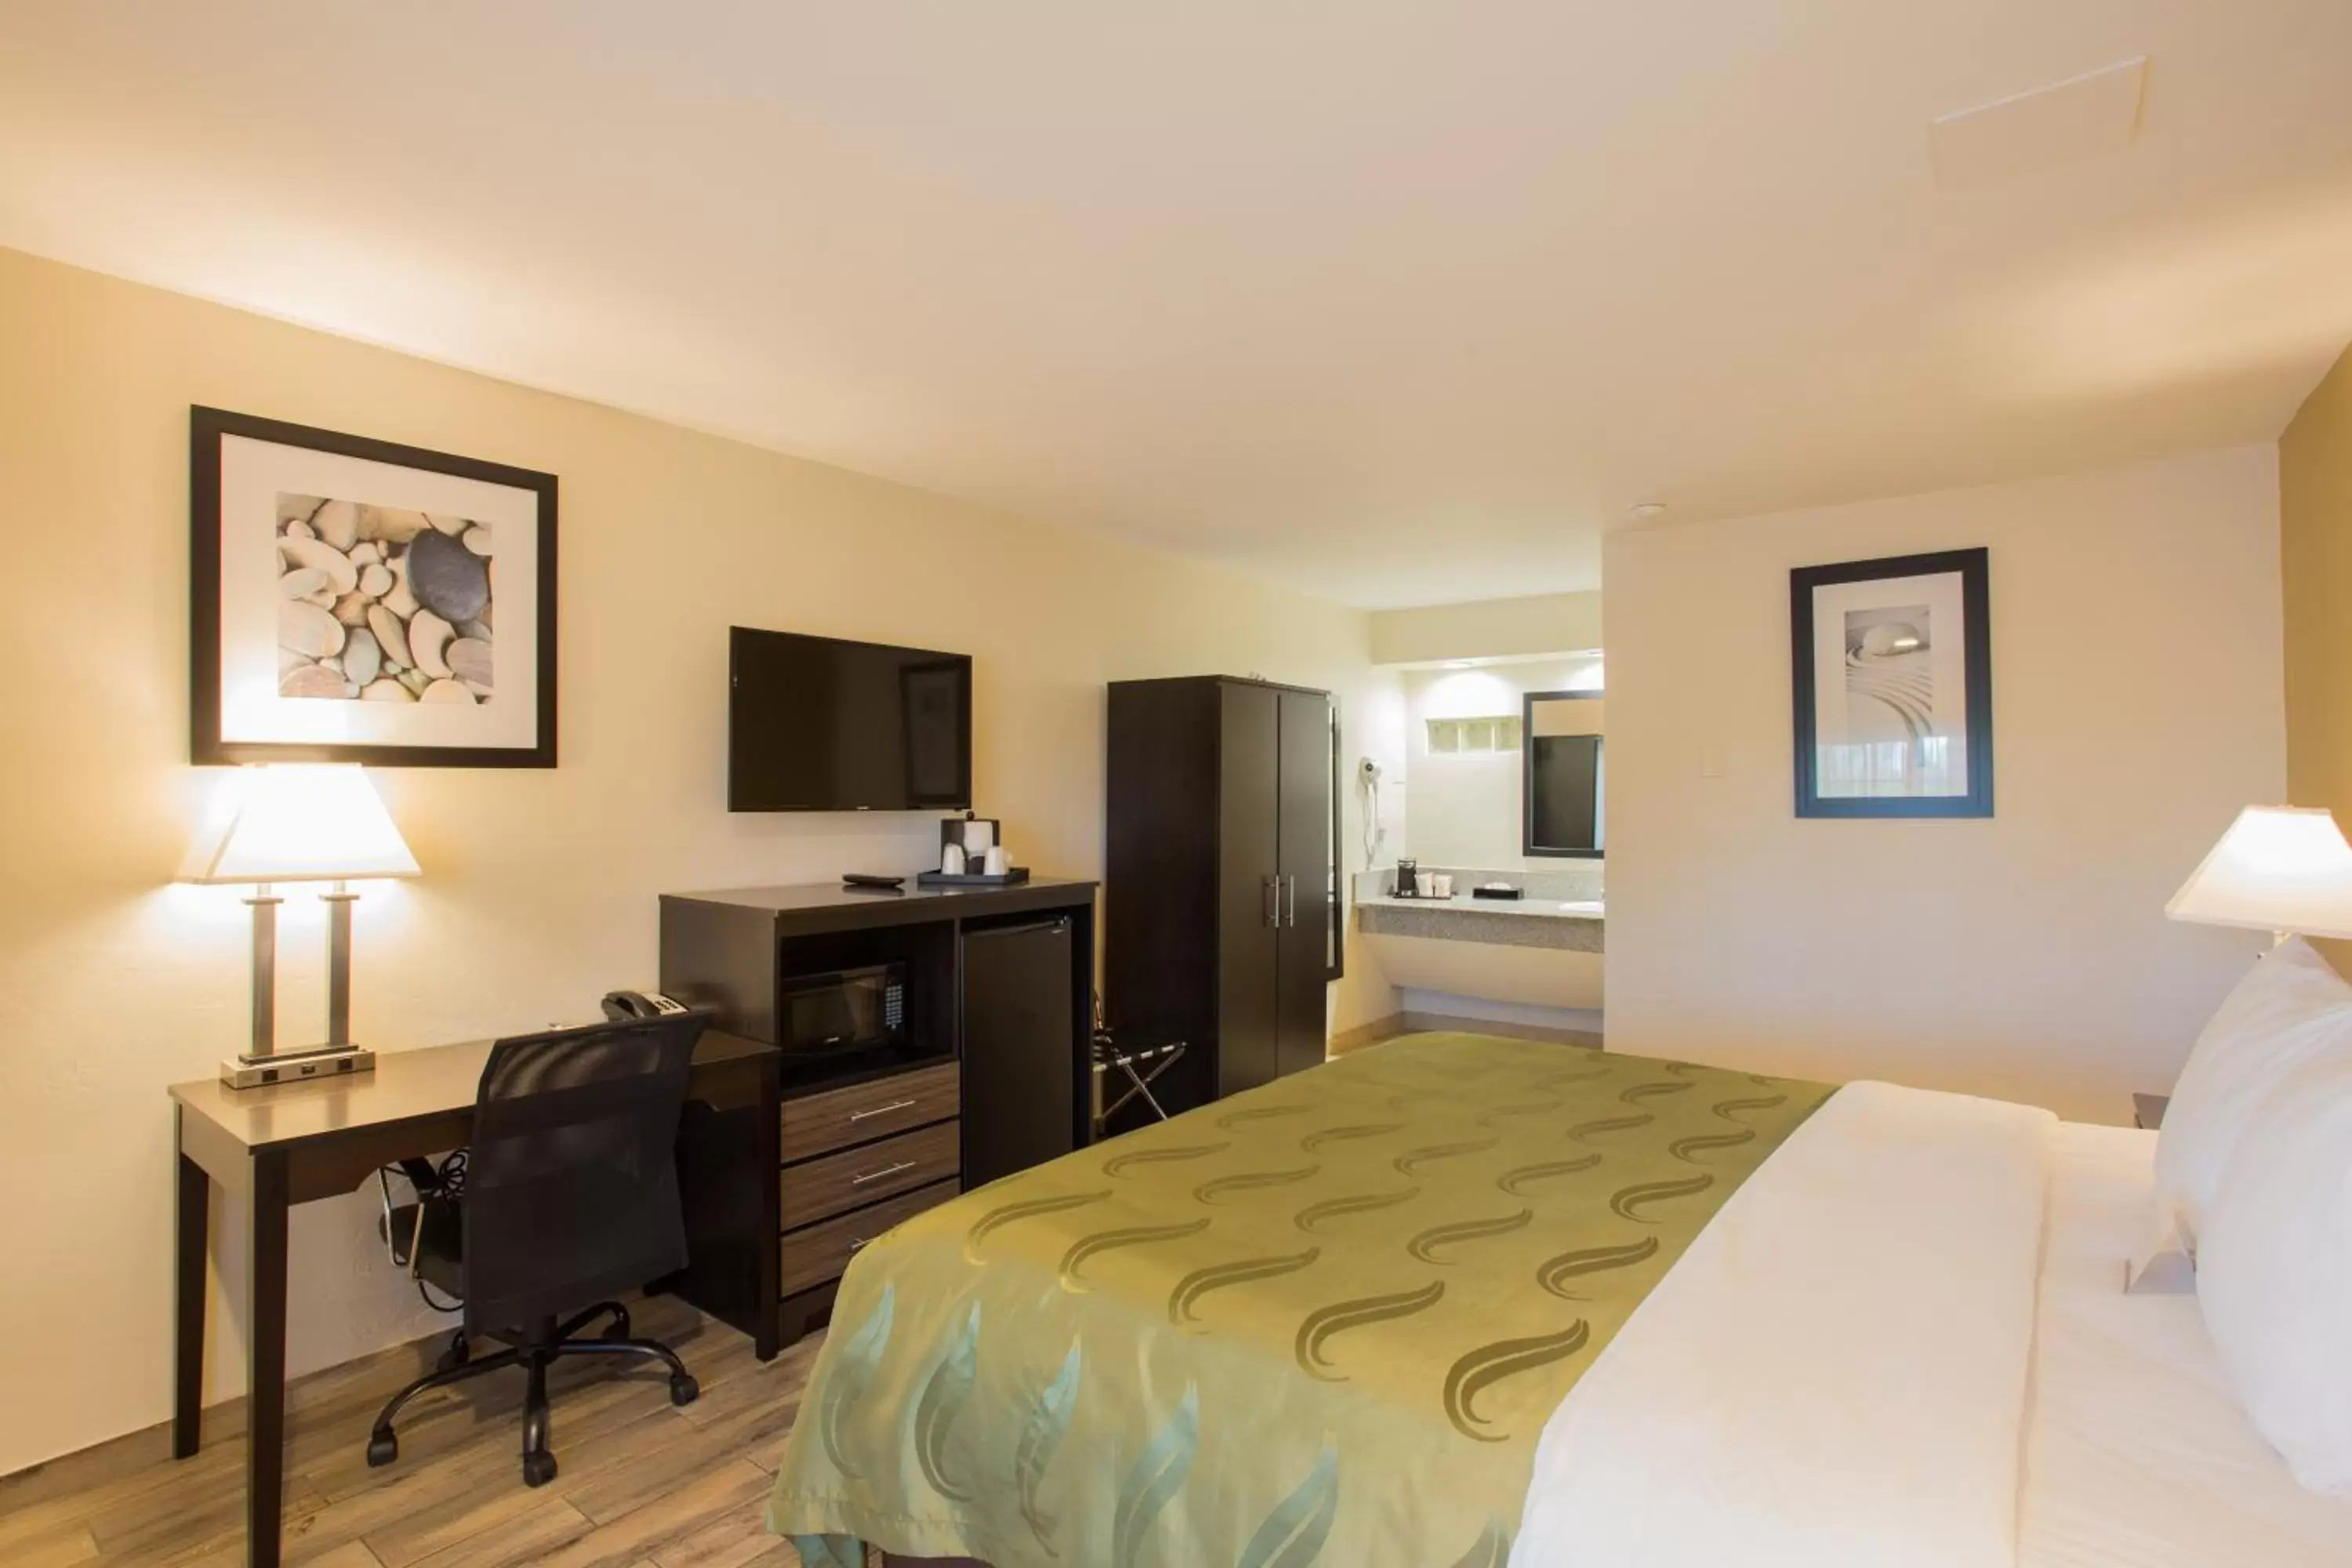 Standard King Room with Roll-in Shower - Accessible/Non-Smoking in Quality Inn Escondido Downtown